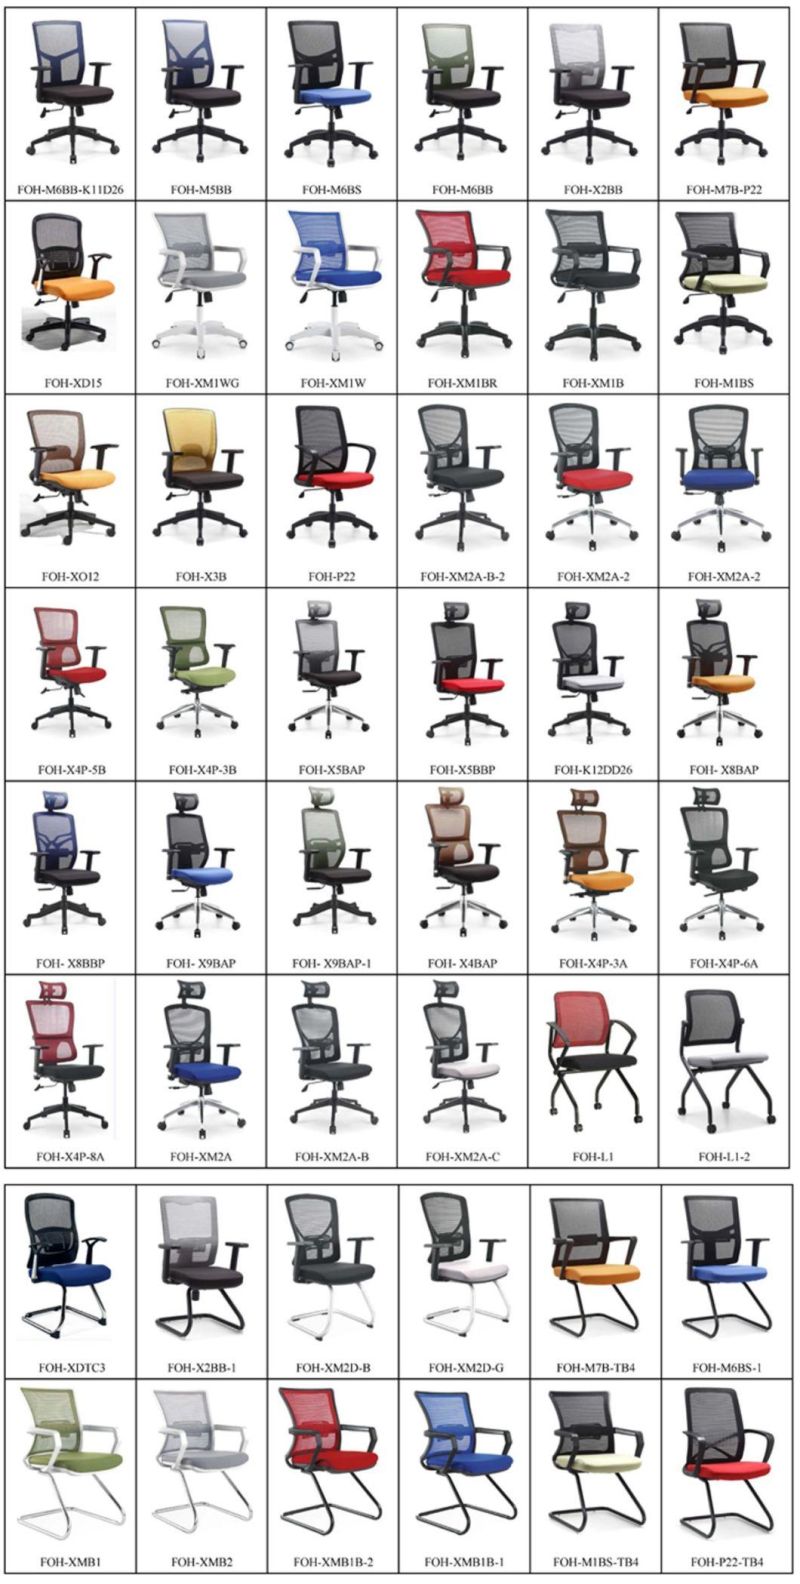 Modern Manager Office Chair Ergonomic Mechanism for Sale (FOH-XM2A)